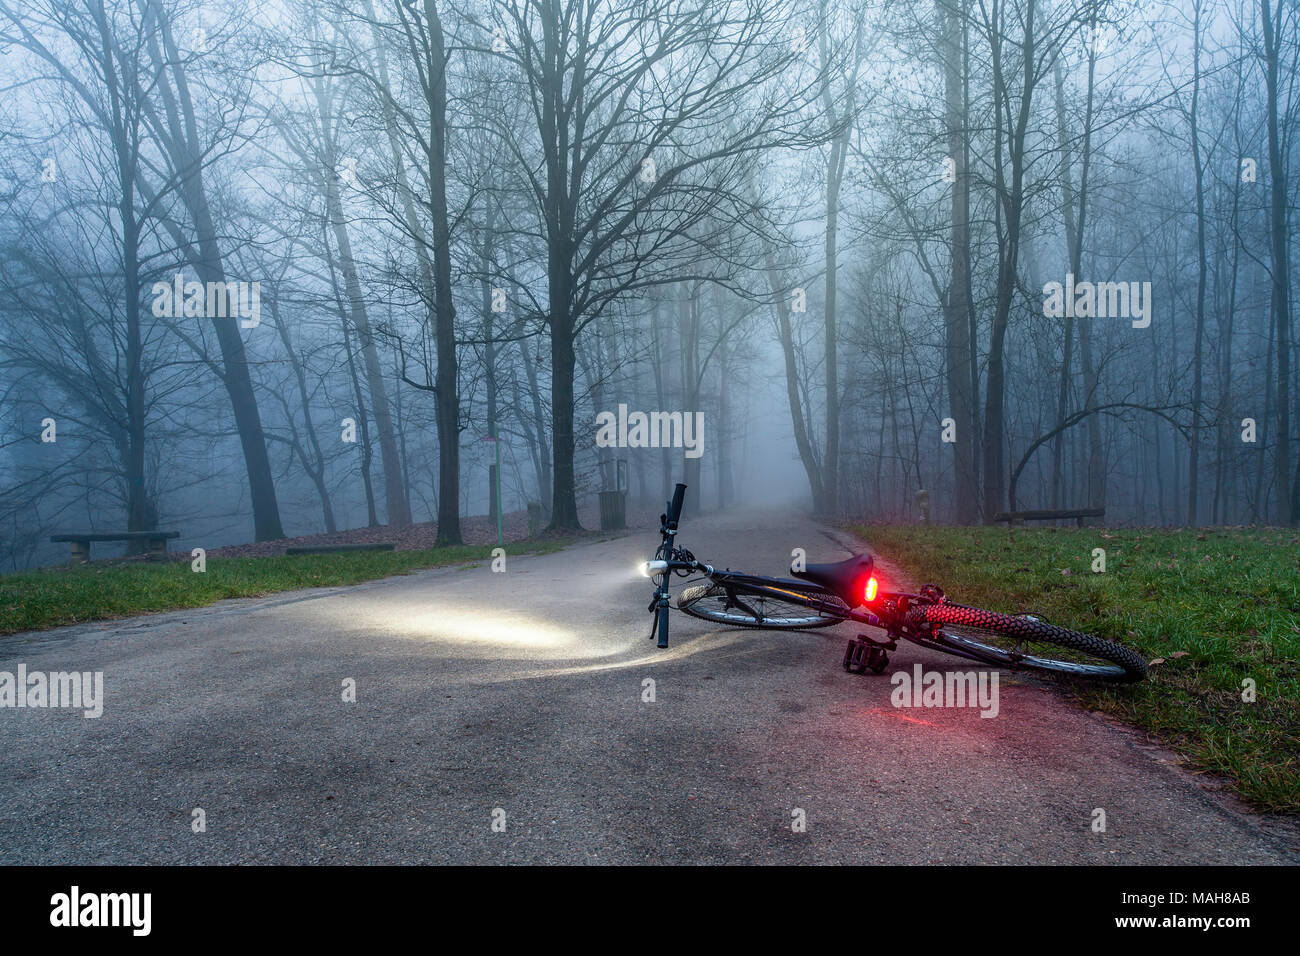 A bycicle left alone in the park street at nighttime with the lights on  The scene suggests a kidnap or a crime Stock Photo